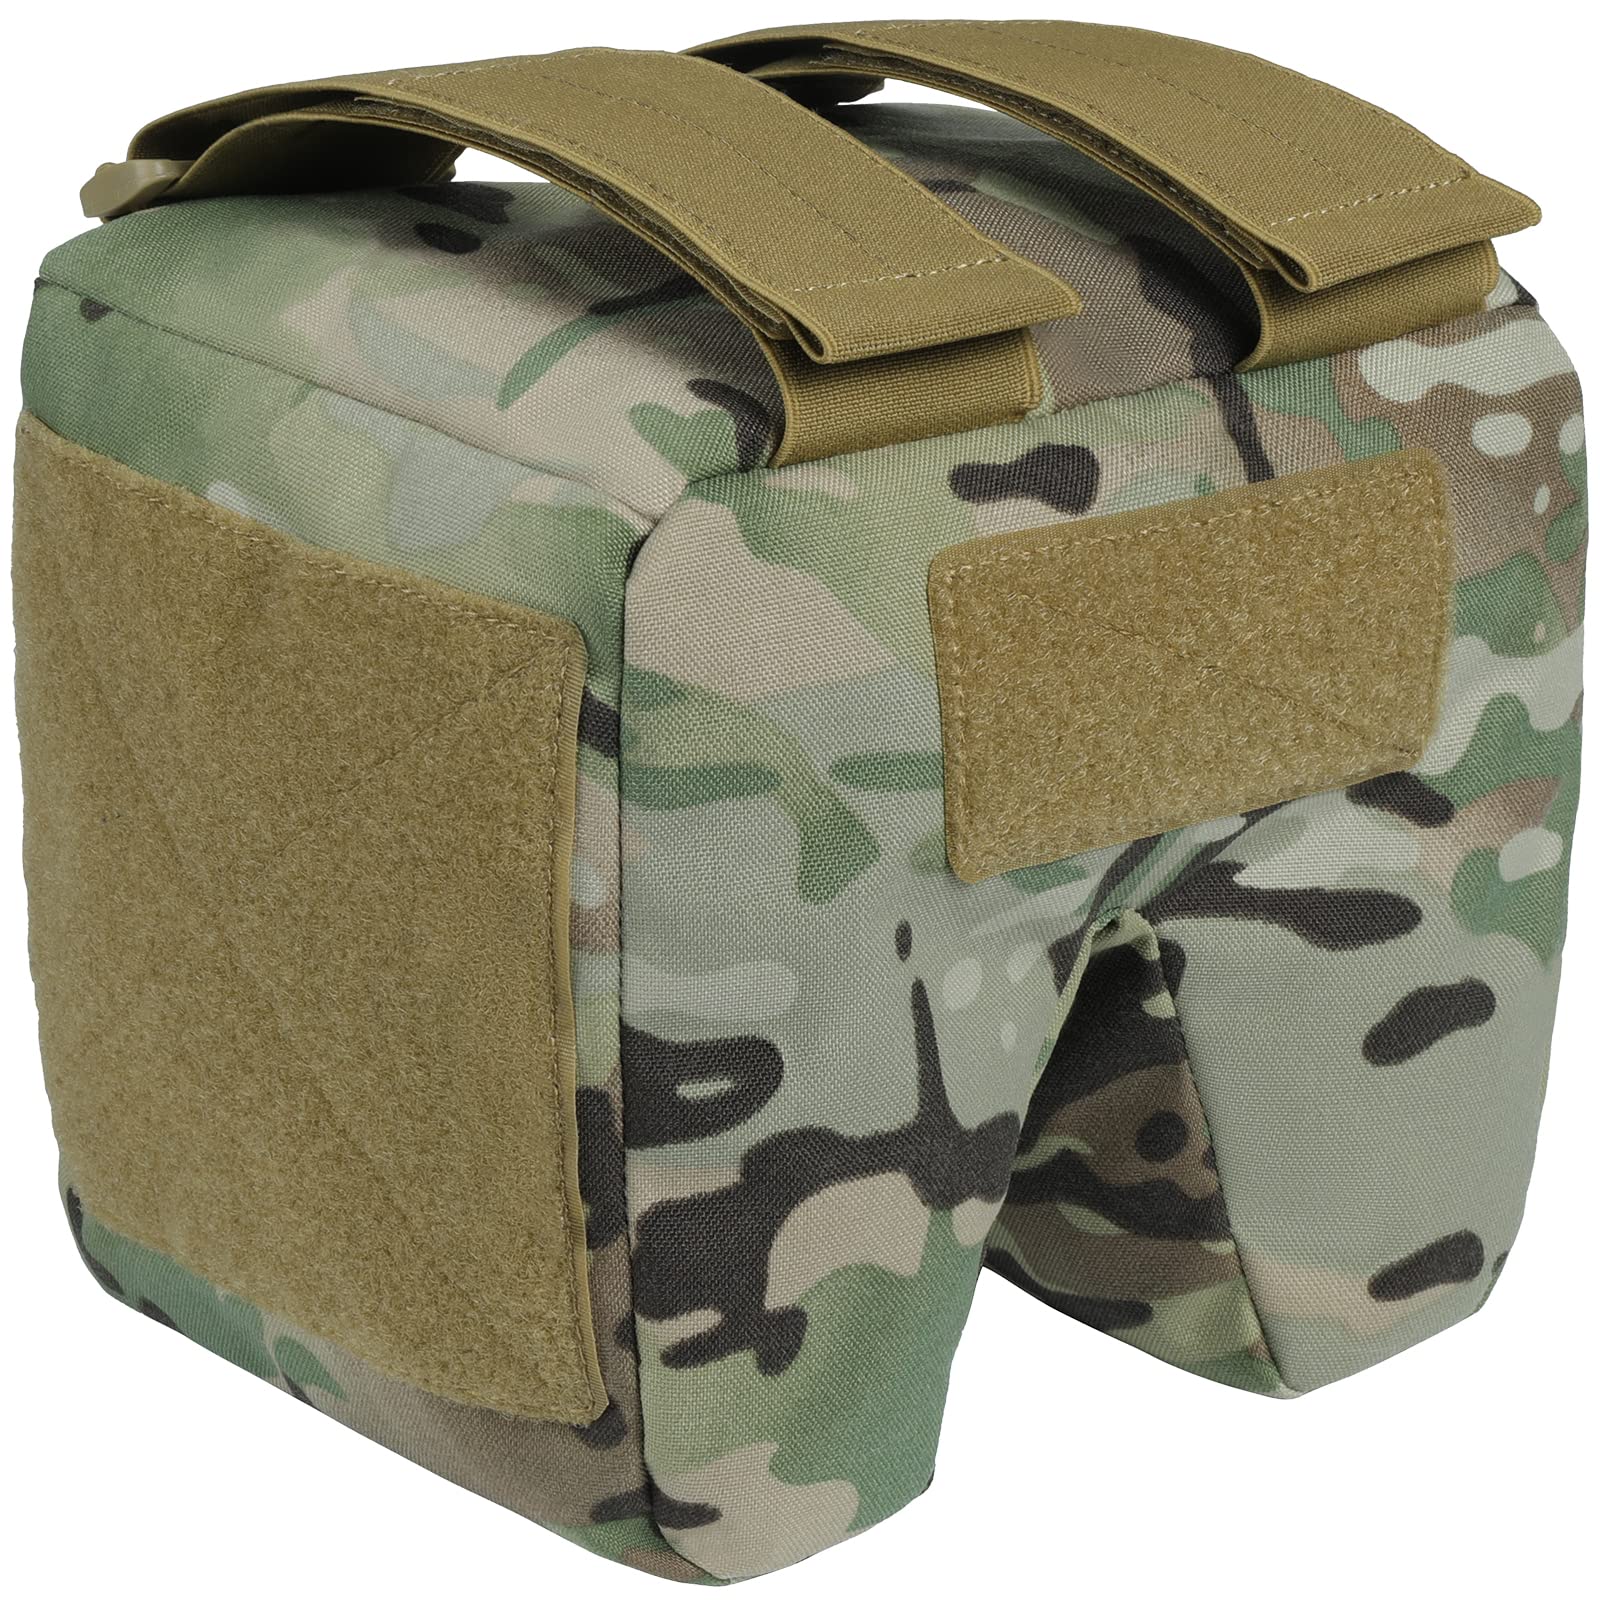 Ultralight Tactical Rear Squeeze Bag for Sale, Prefilled | Crosstac